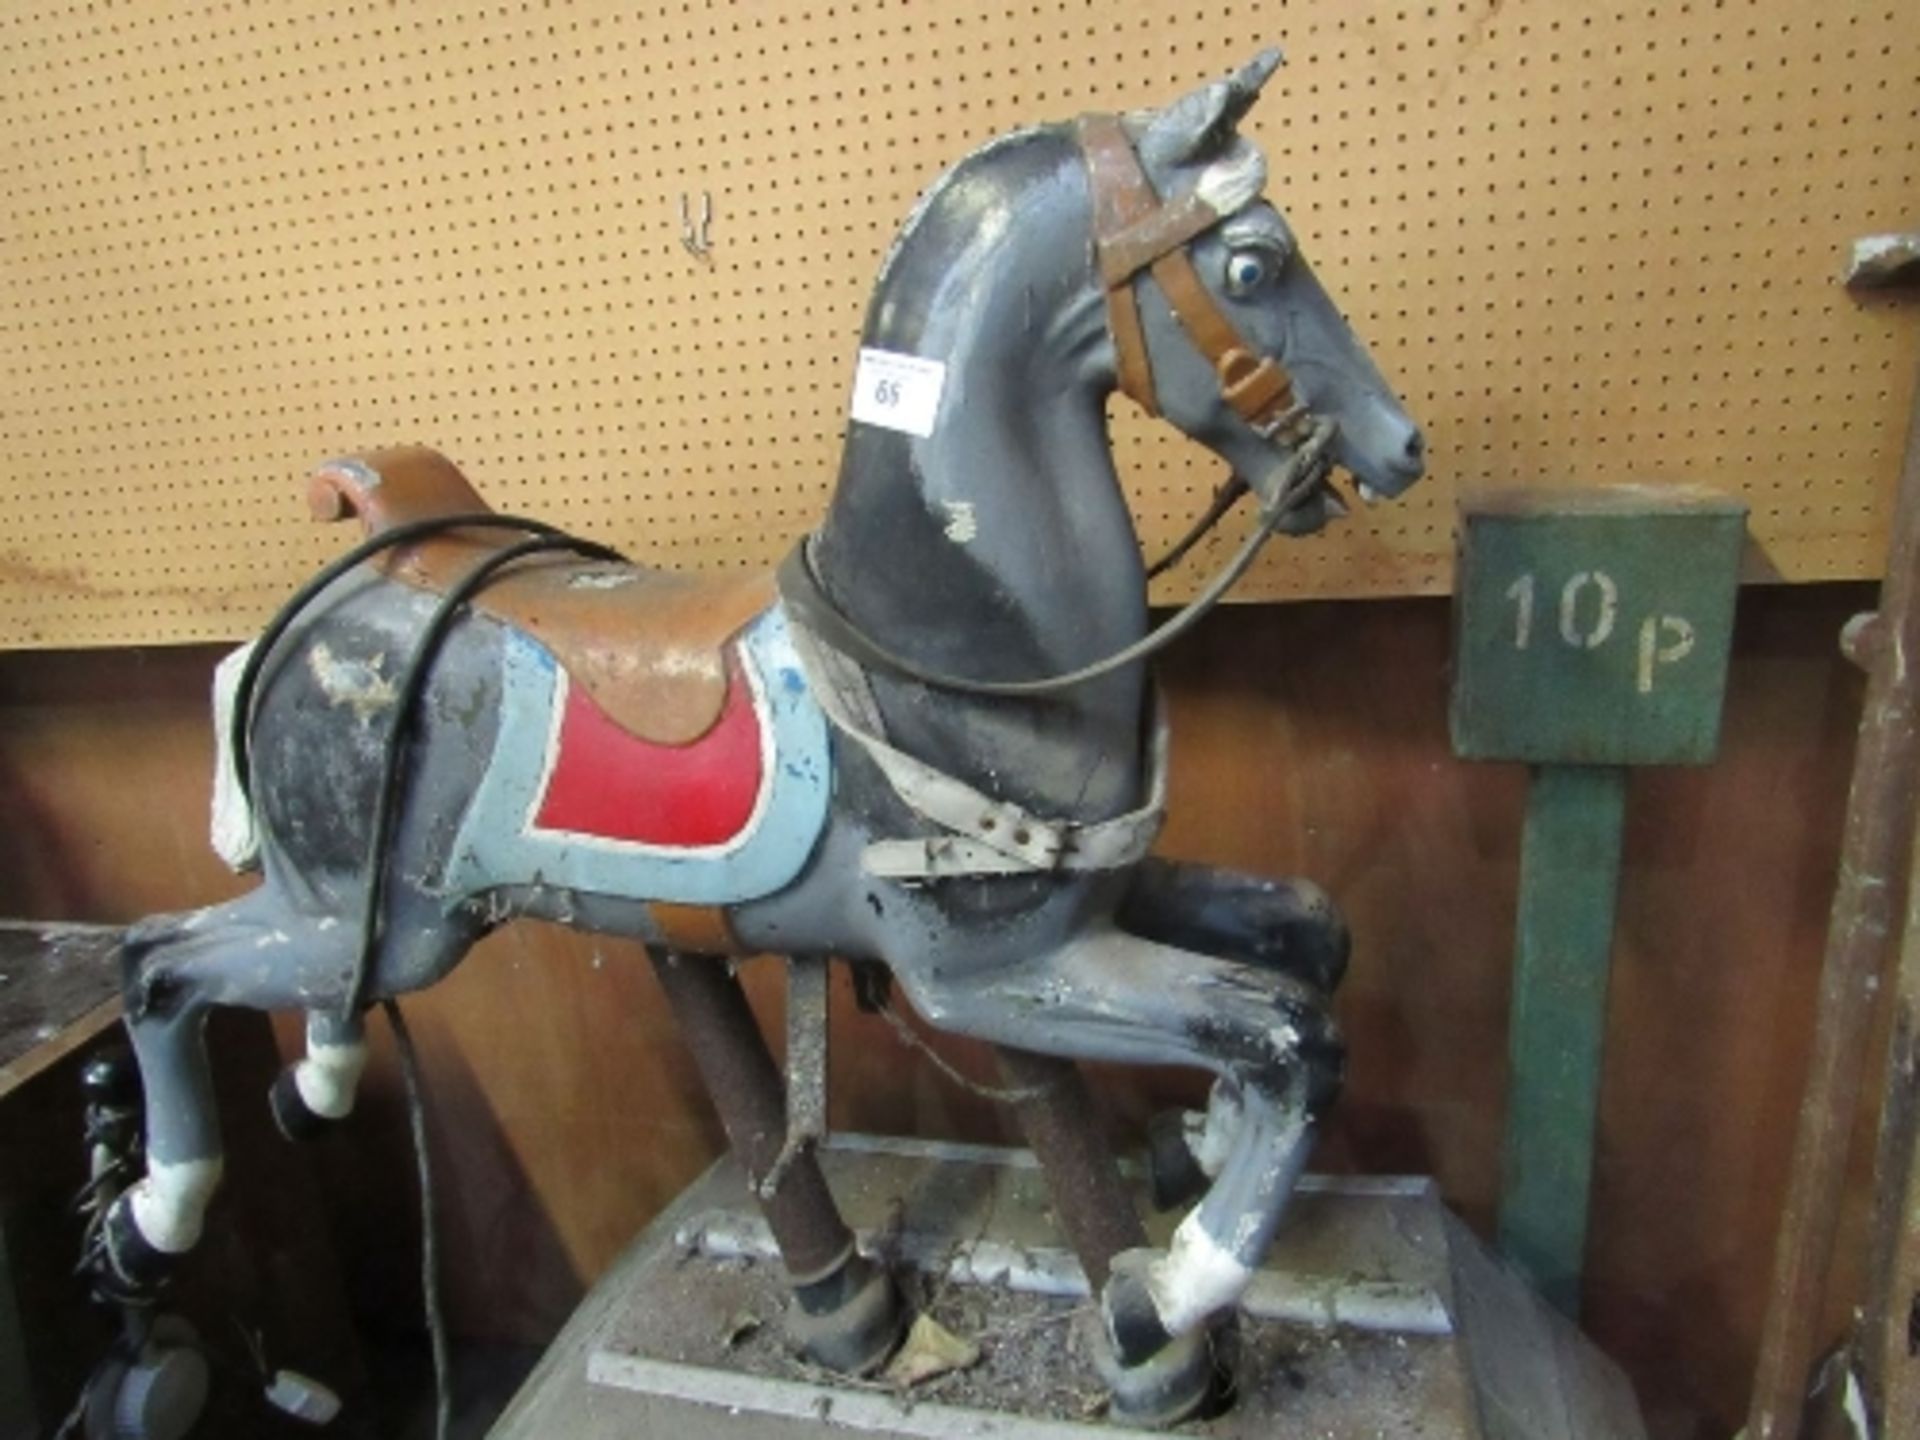 Mechanical/electric amusement arcade children's ride-on horse, height 132cms x 115cm length. - Image 3 of 4